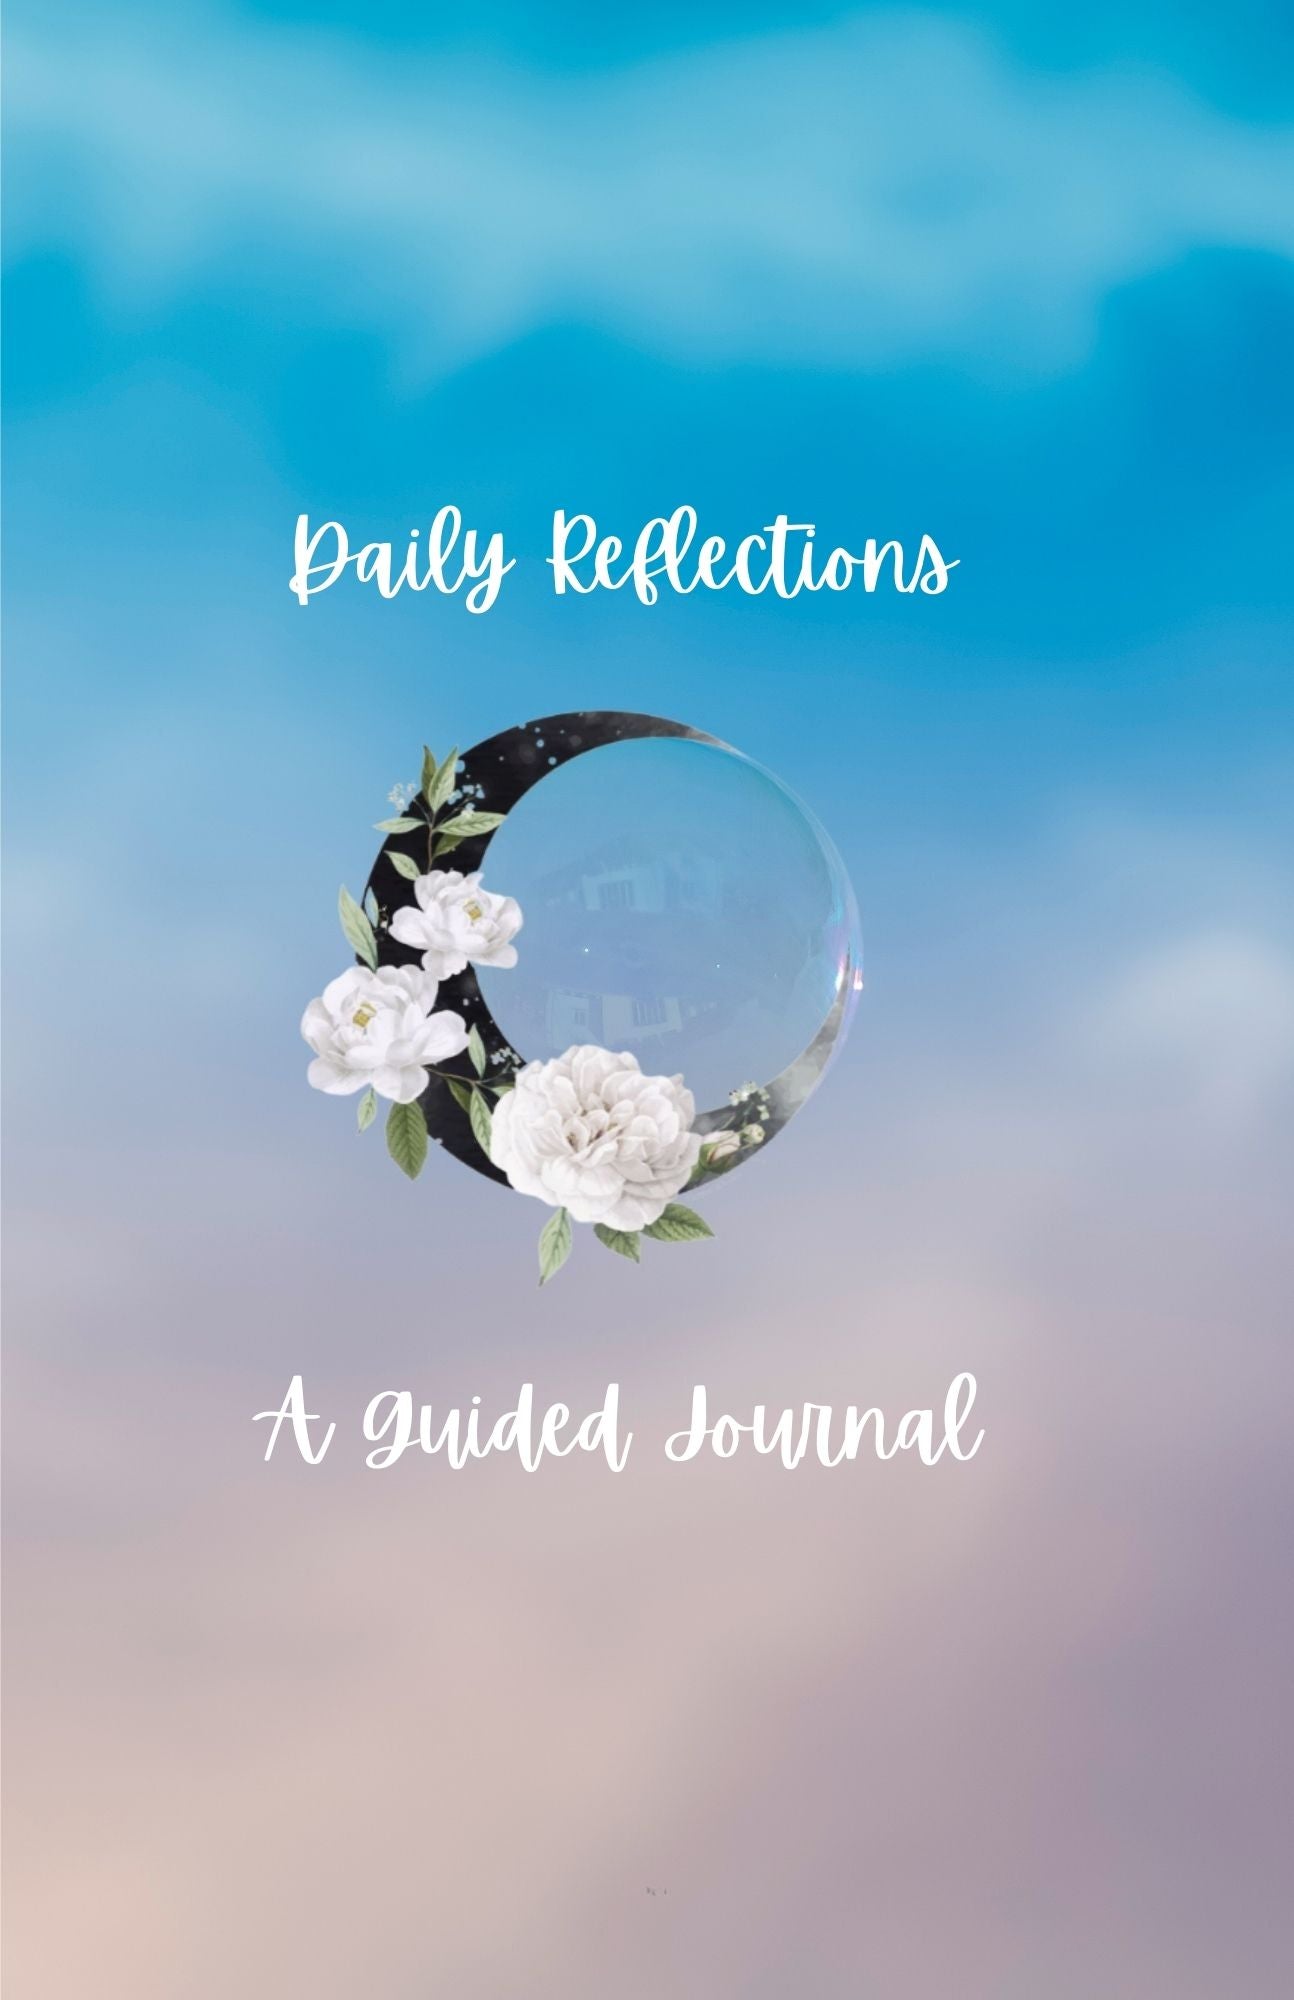 Daily Reflections Journal & Planner: By Letsjazzitup2